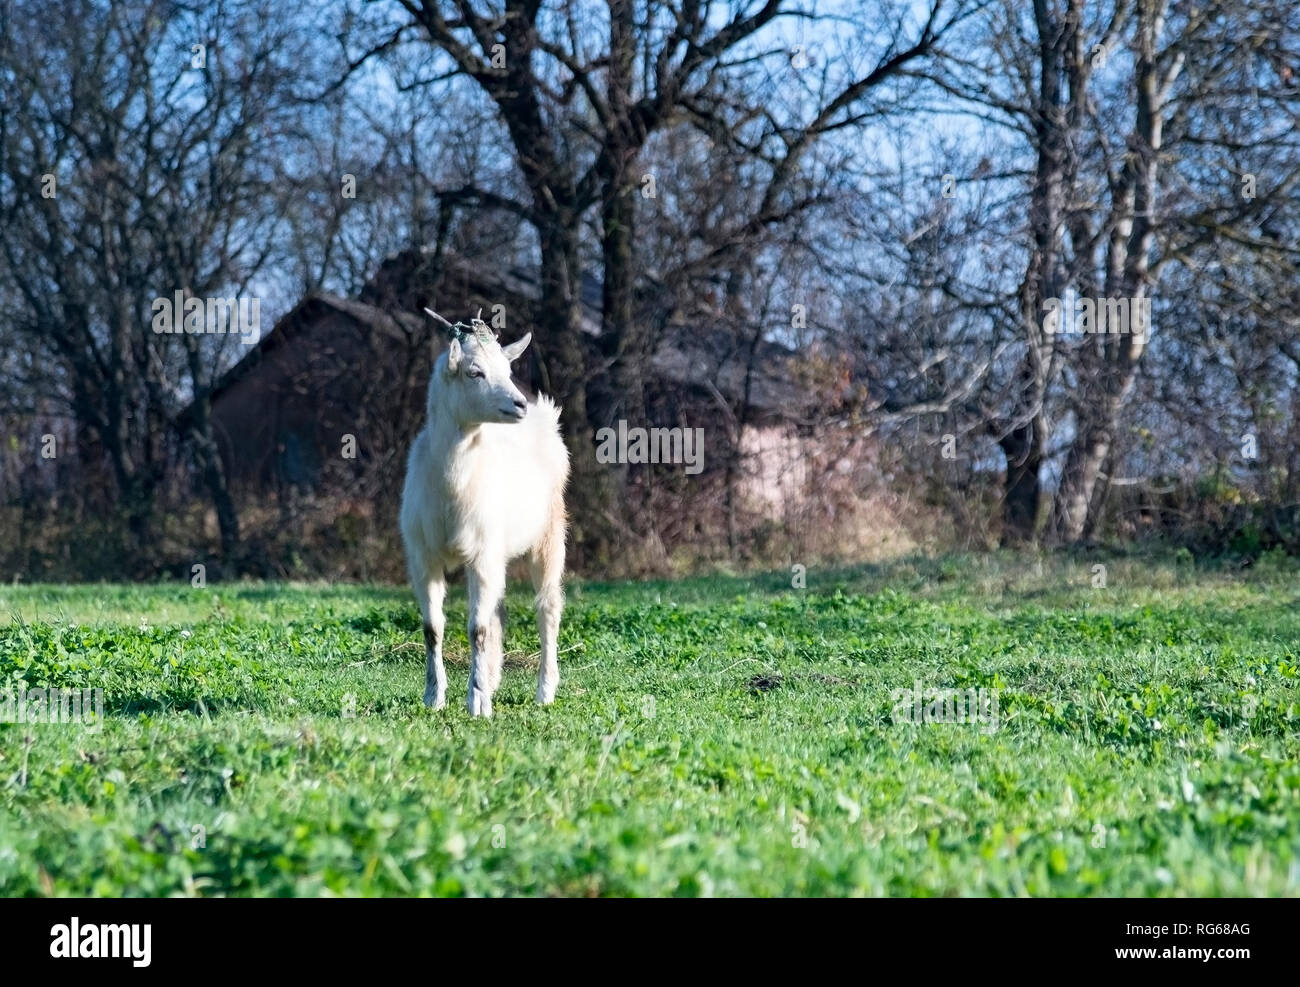 goat standing on background of a village house in green grass Stock Photo